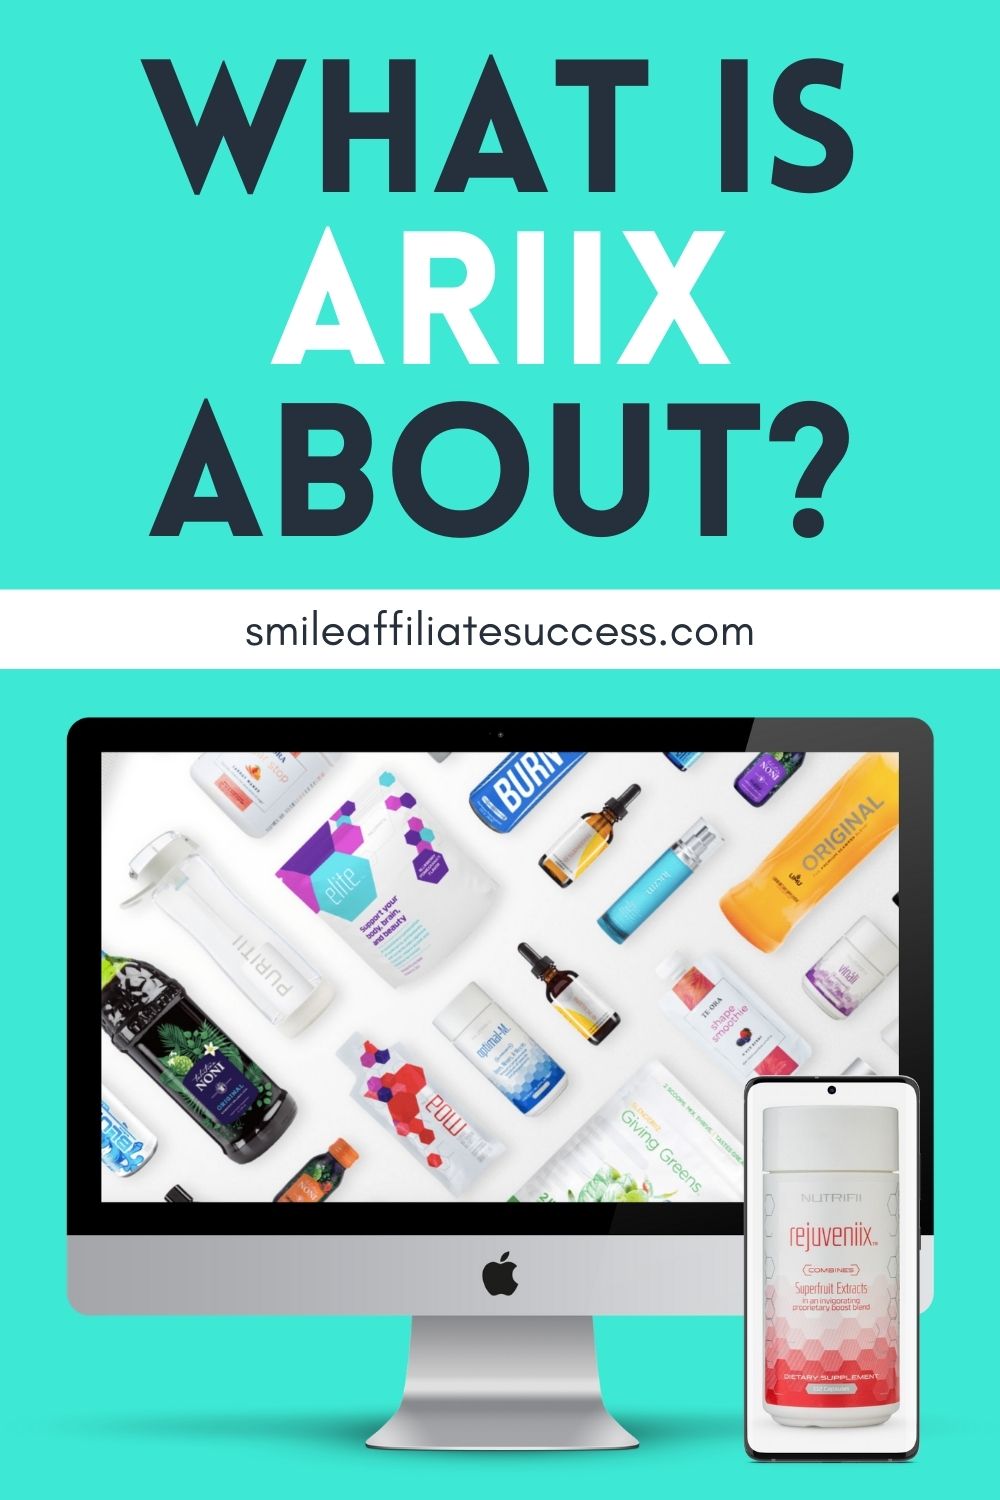 What Is Ariix About?